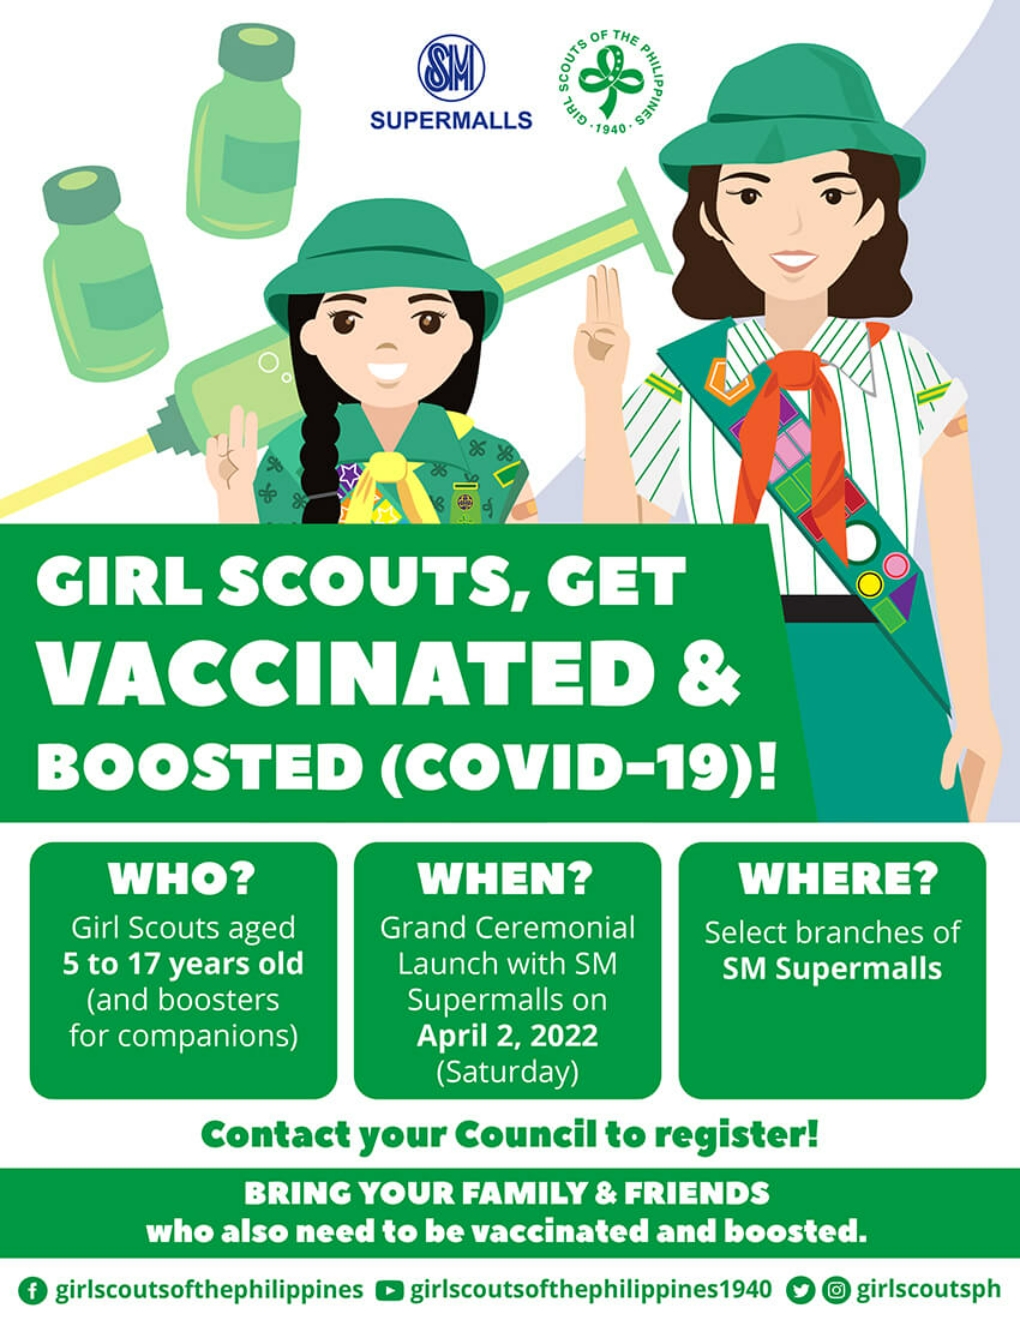 GIRL SCOUTS, GET VACCINATED & BOOSTED (COVID-19)!